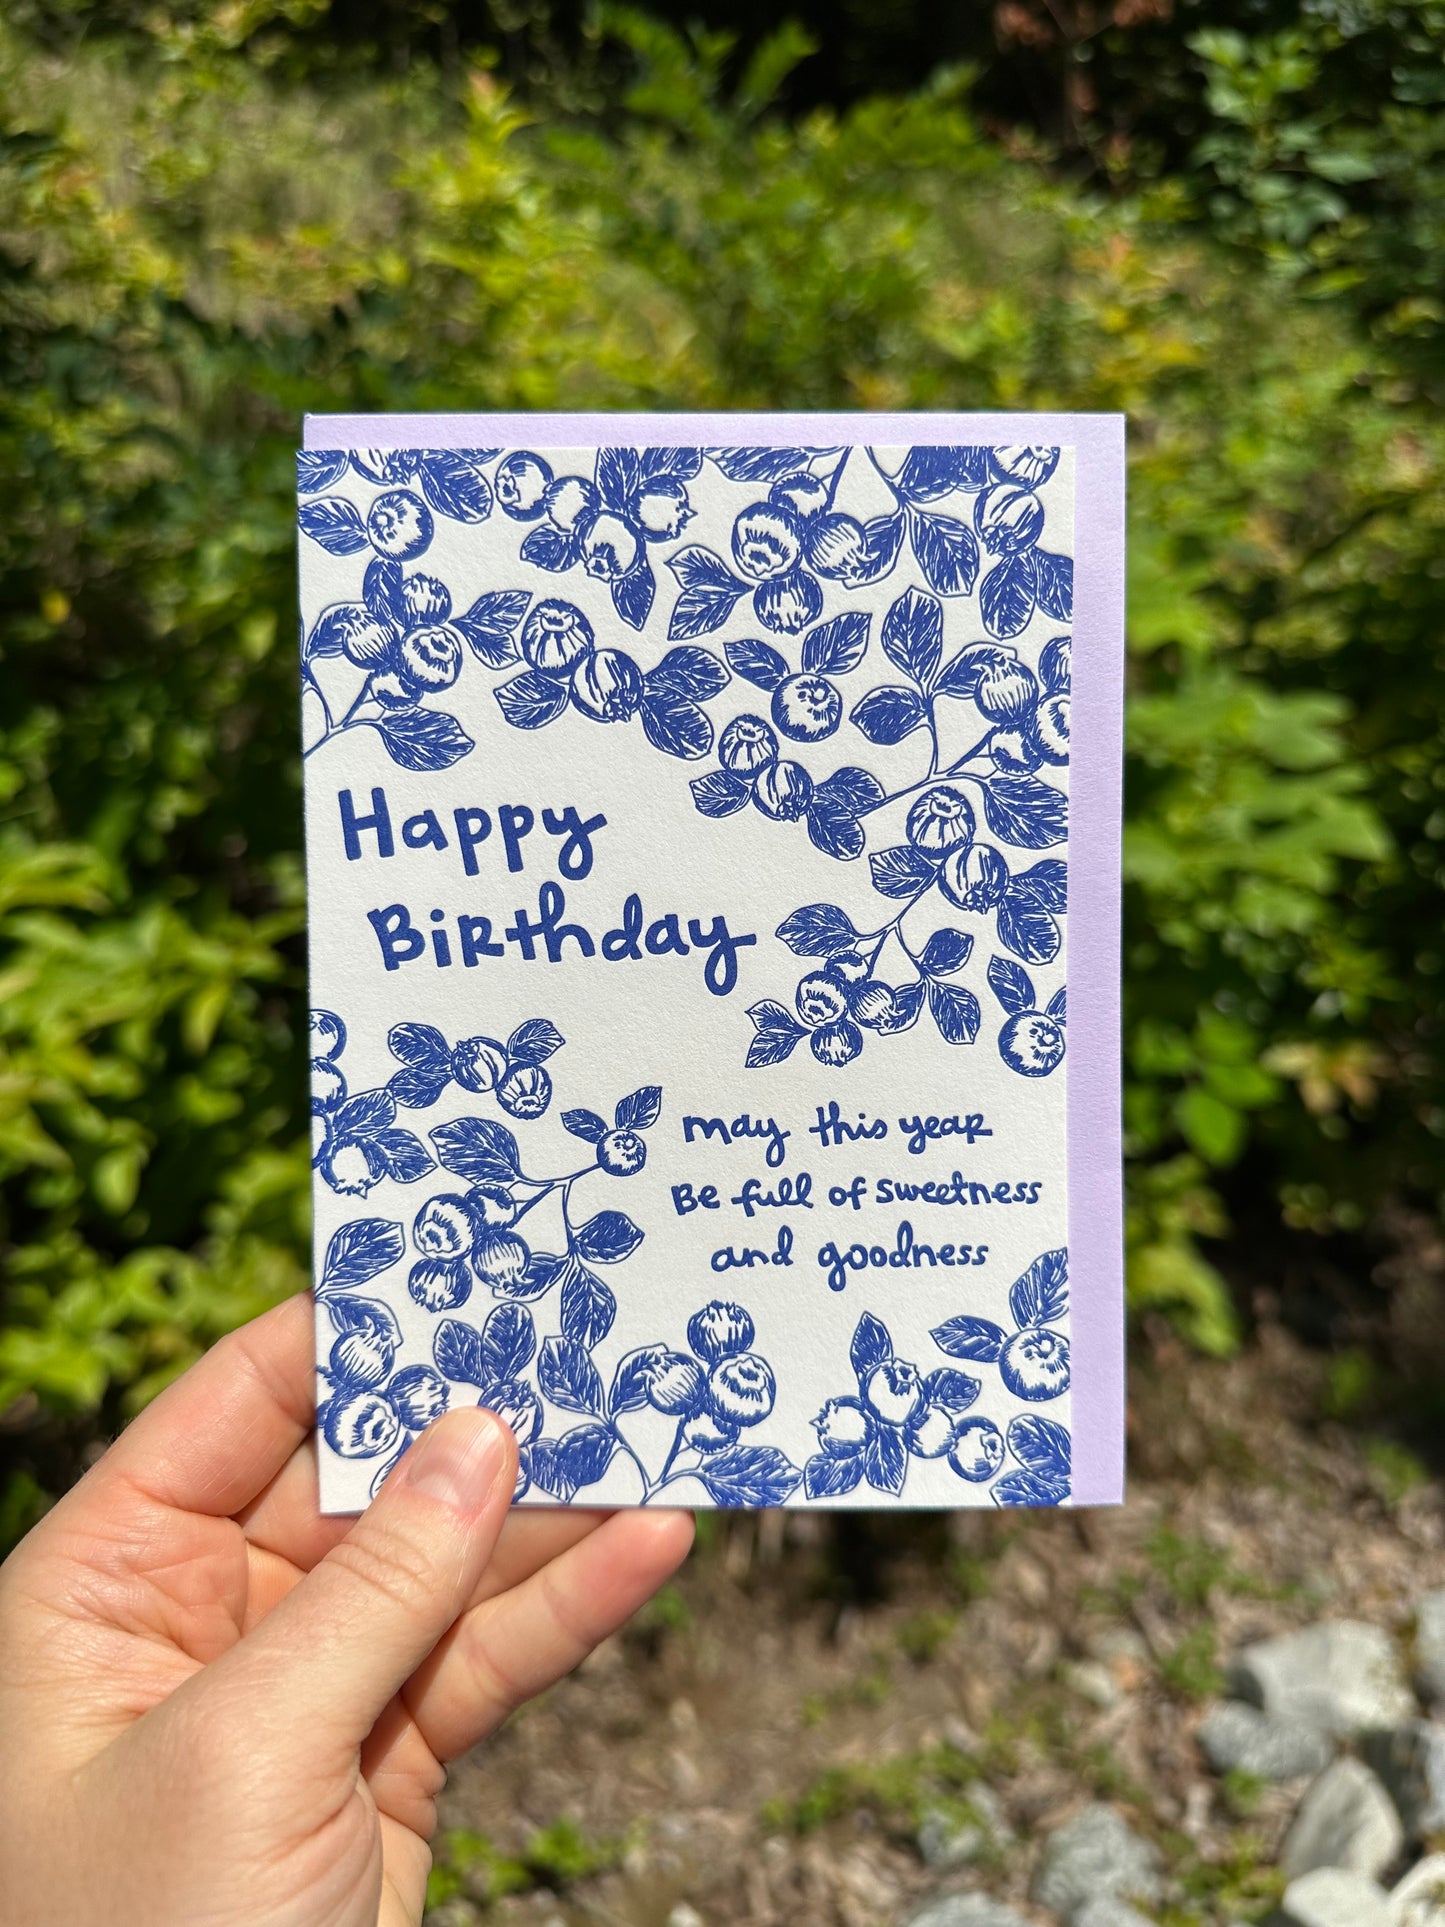 Letterpress greeting card featuring hand-drawn blueberries printed in a vibrant blue ink. "Happy Birthday! May this year be full of sweetness and goodness" is written on the card in a whimsical hand-drawn text, in the same blue ink. The card is white, blank inside, and is paired with a soft lilac envelope. Card is held outside on a sunny summer day. 